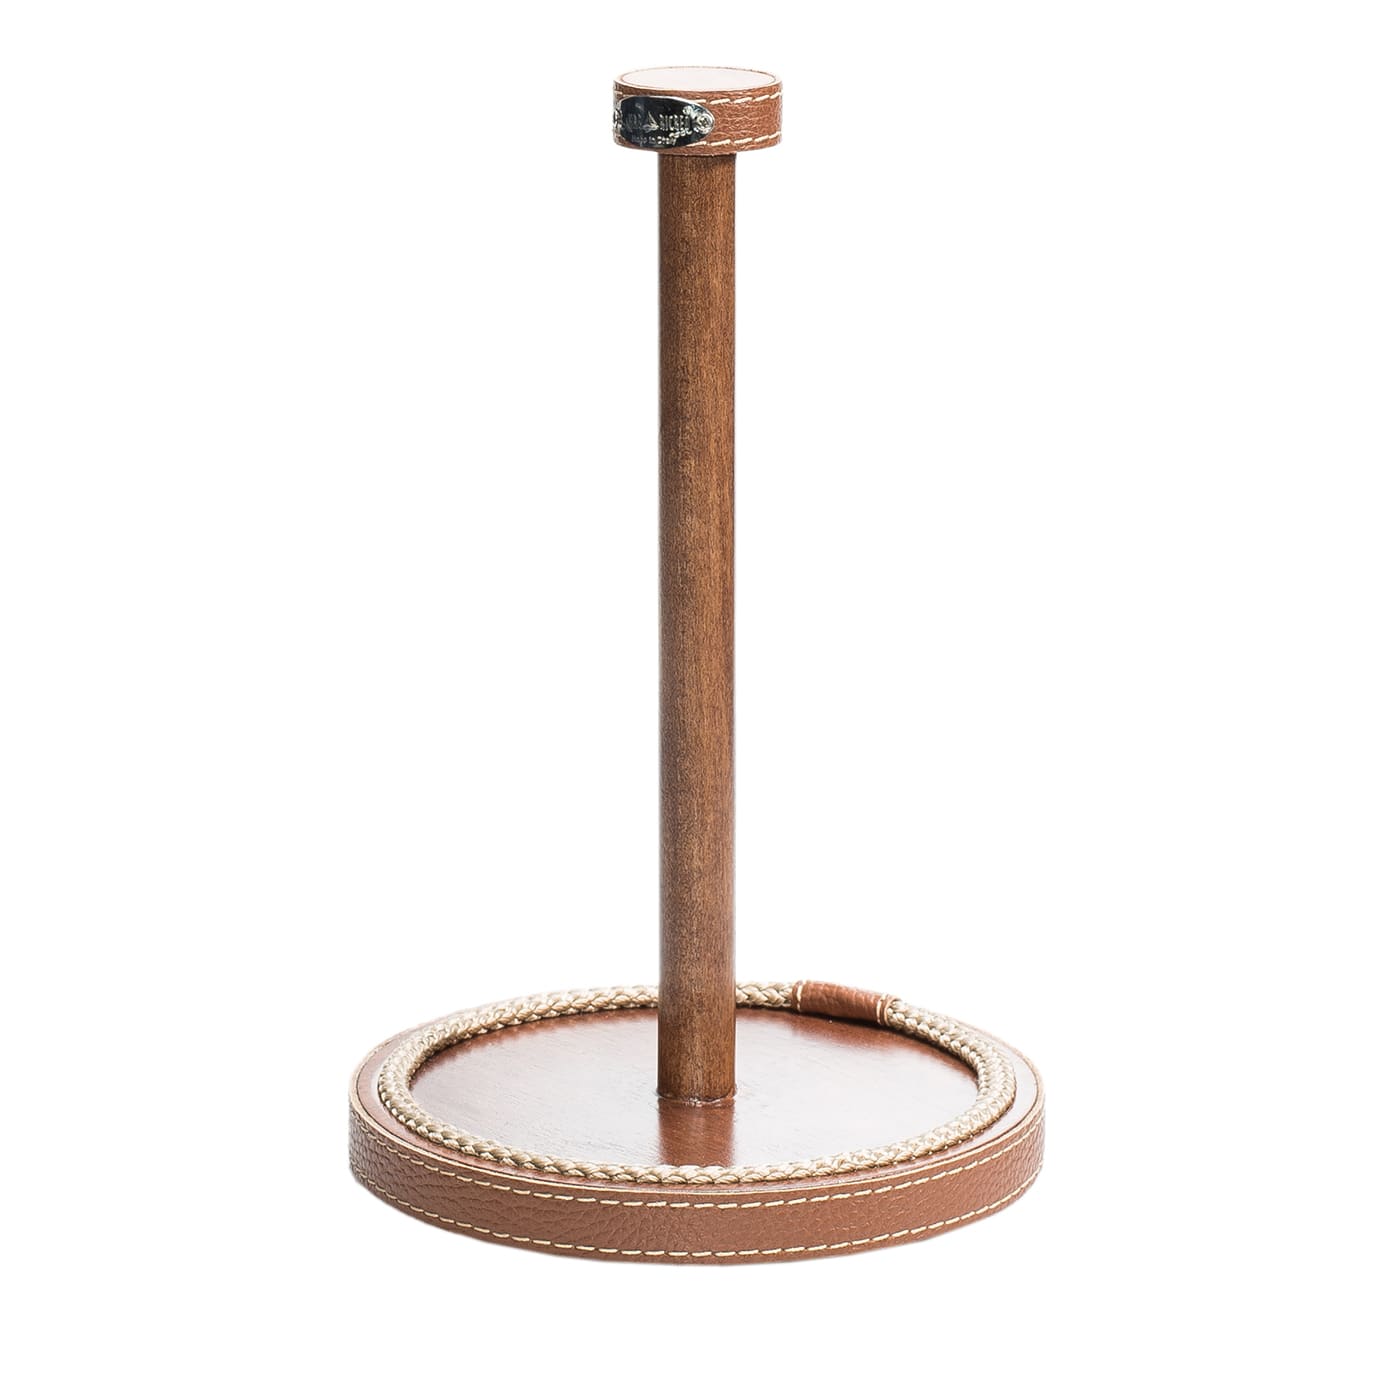 Wooden Paper Towel Holder with Beige Eco-Leather and Rope Inserts - Marricreo